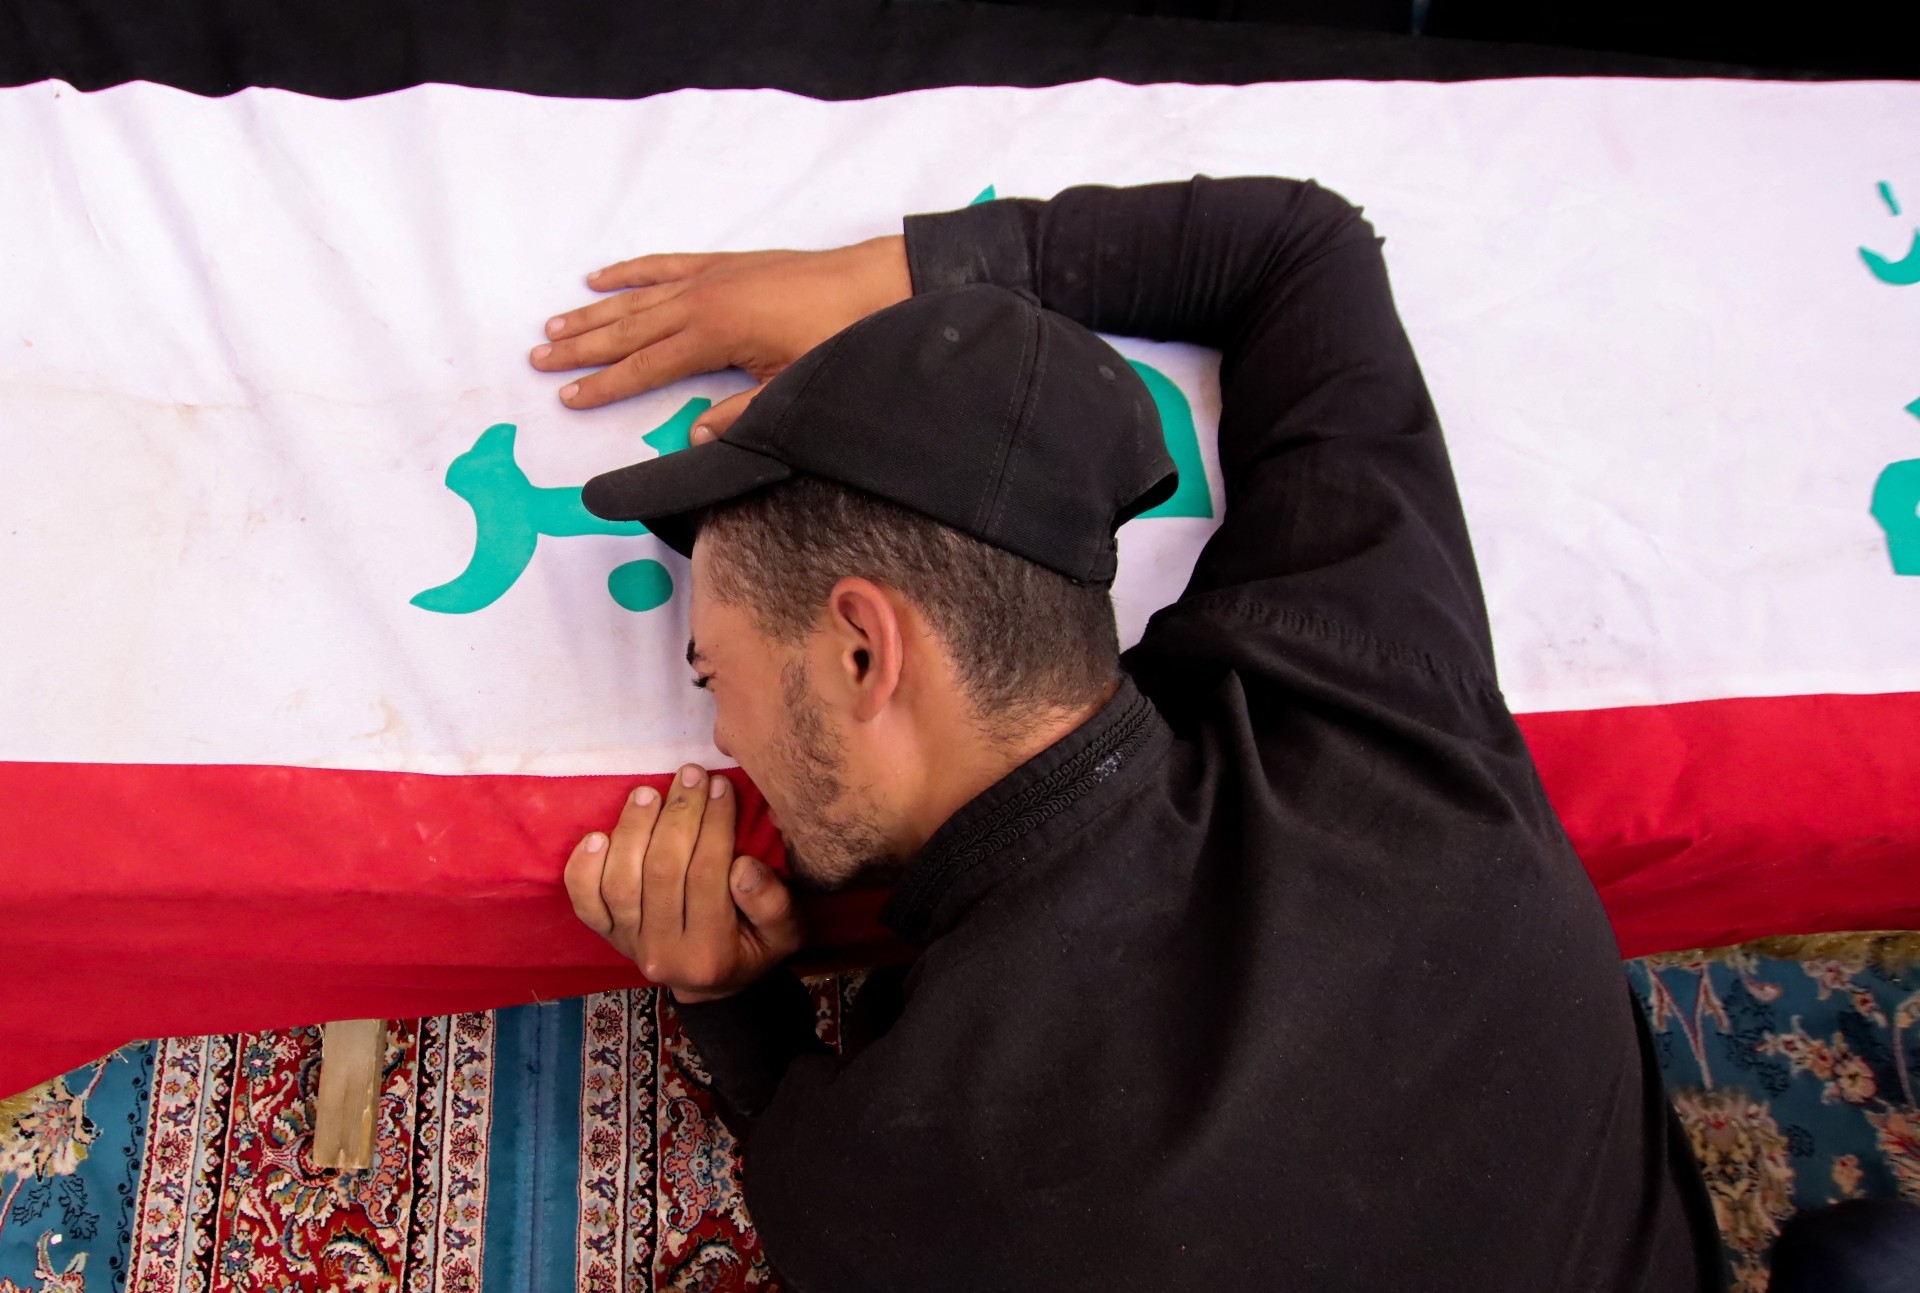 A mourner attends a mass funeral for supporters of Muqtada al-Sadr who were killed during clashes in Baghdad's Green Zone, at a cemetery in Najaf on 30 August (AFP)